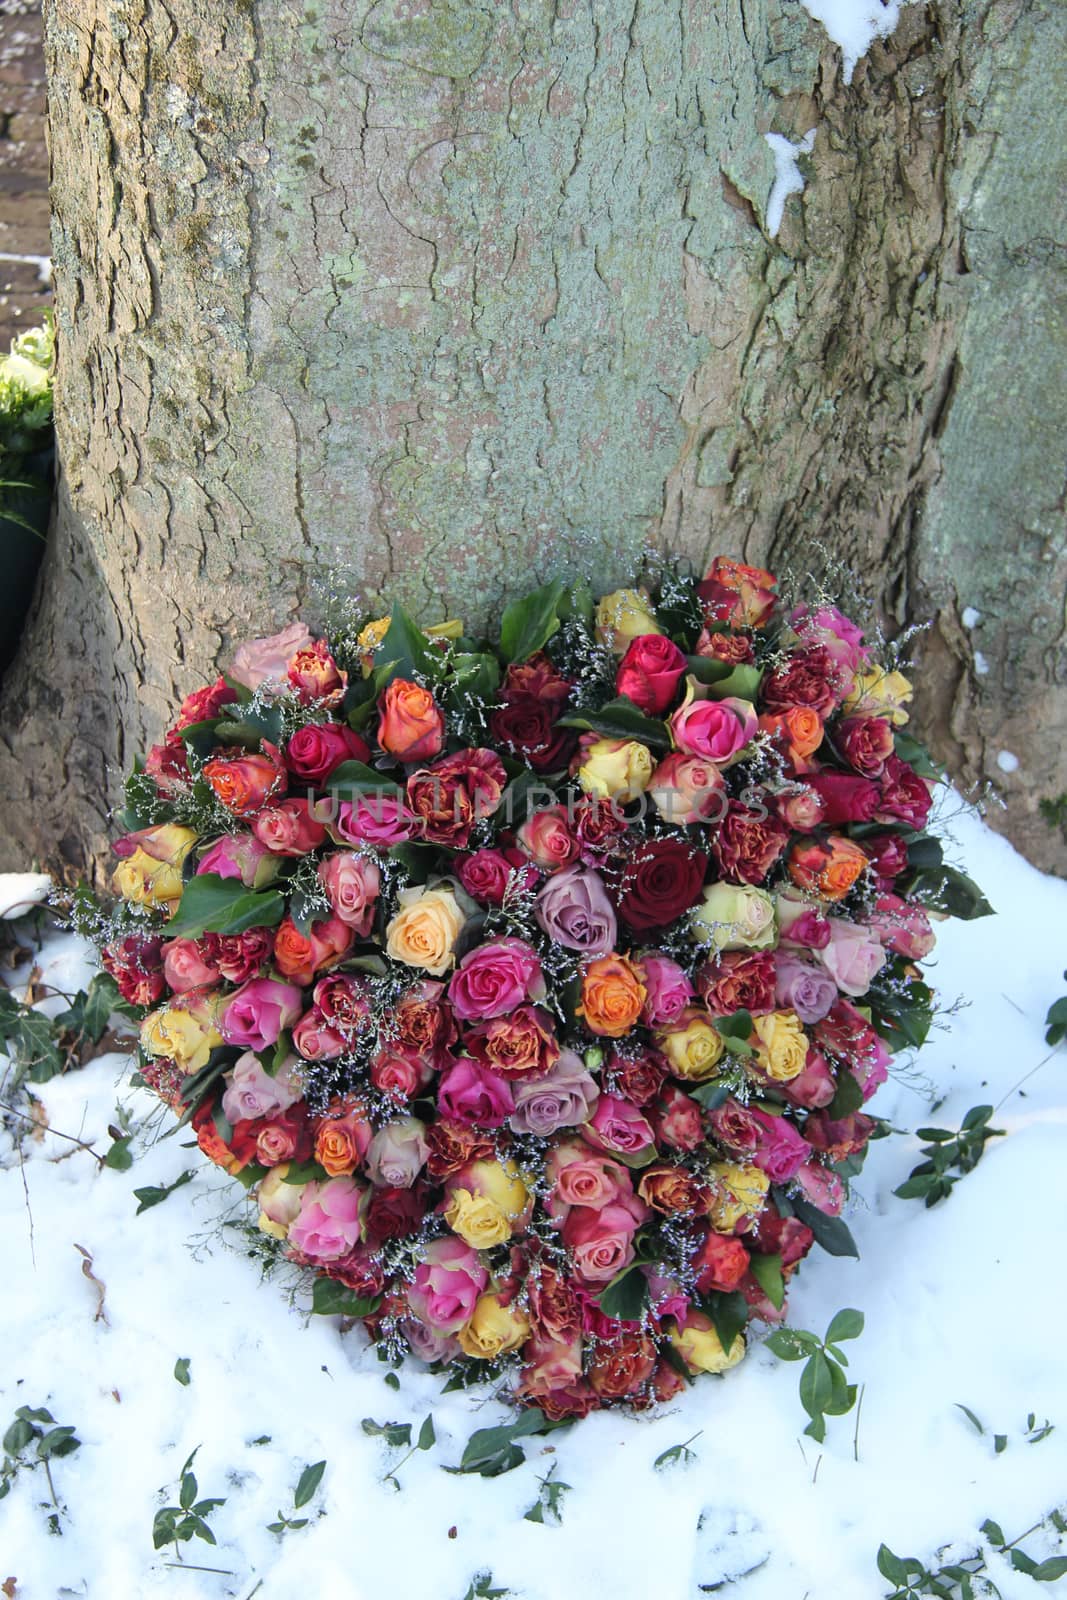 Heart shaped sympathy flowers in the snow